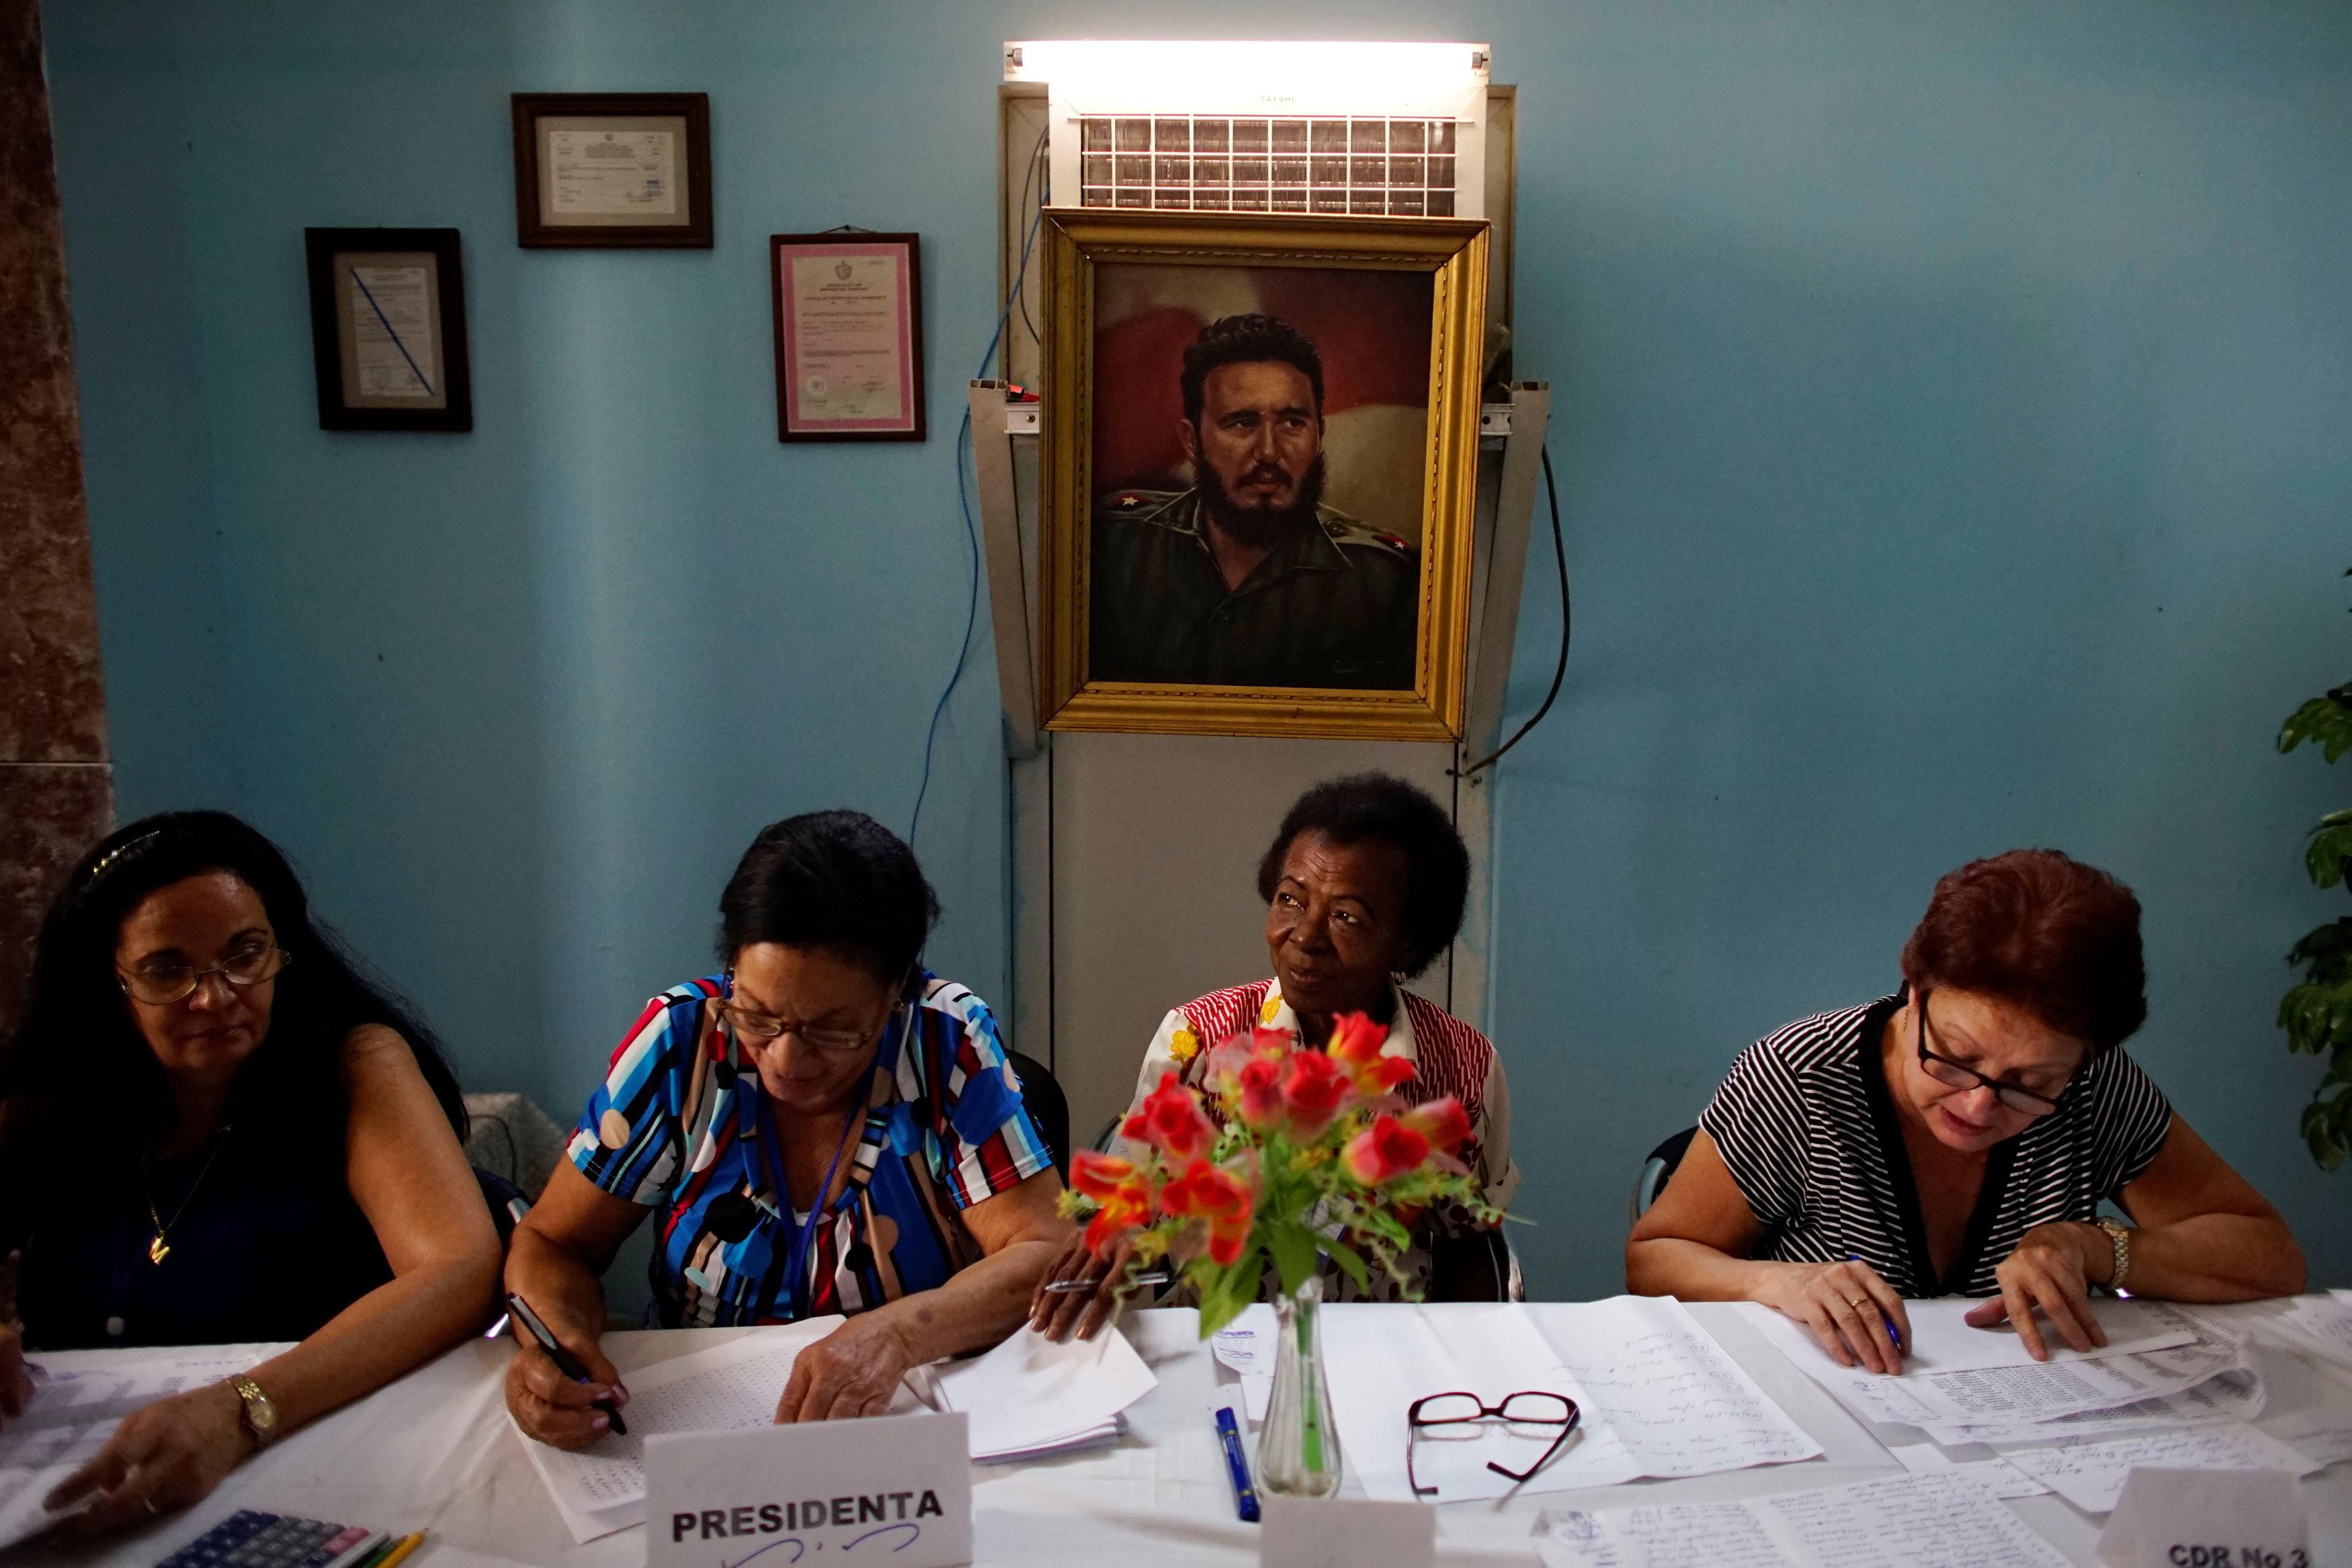 Cubans vote in municipal elections with eye to leadership change